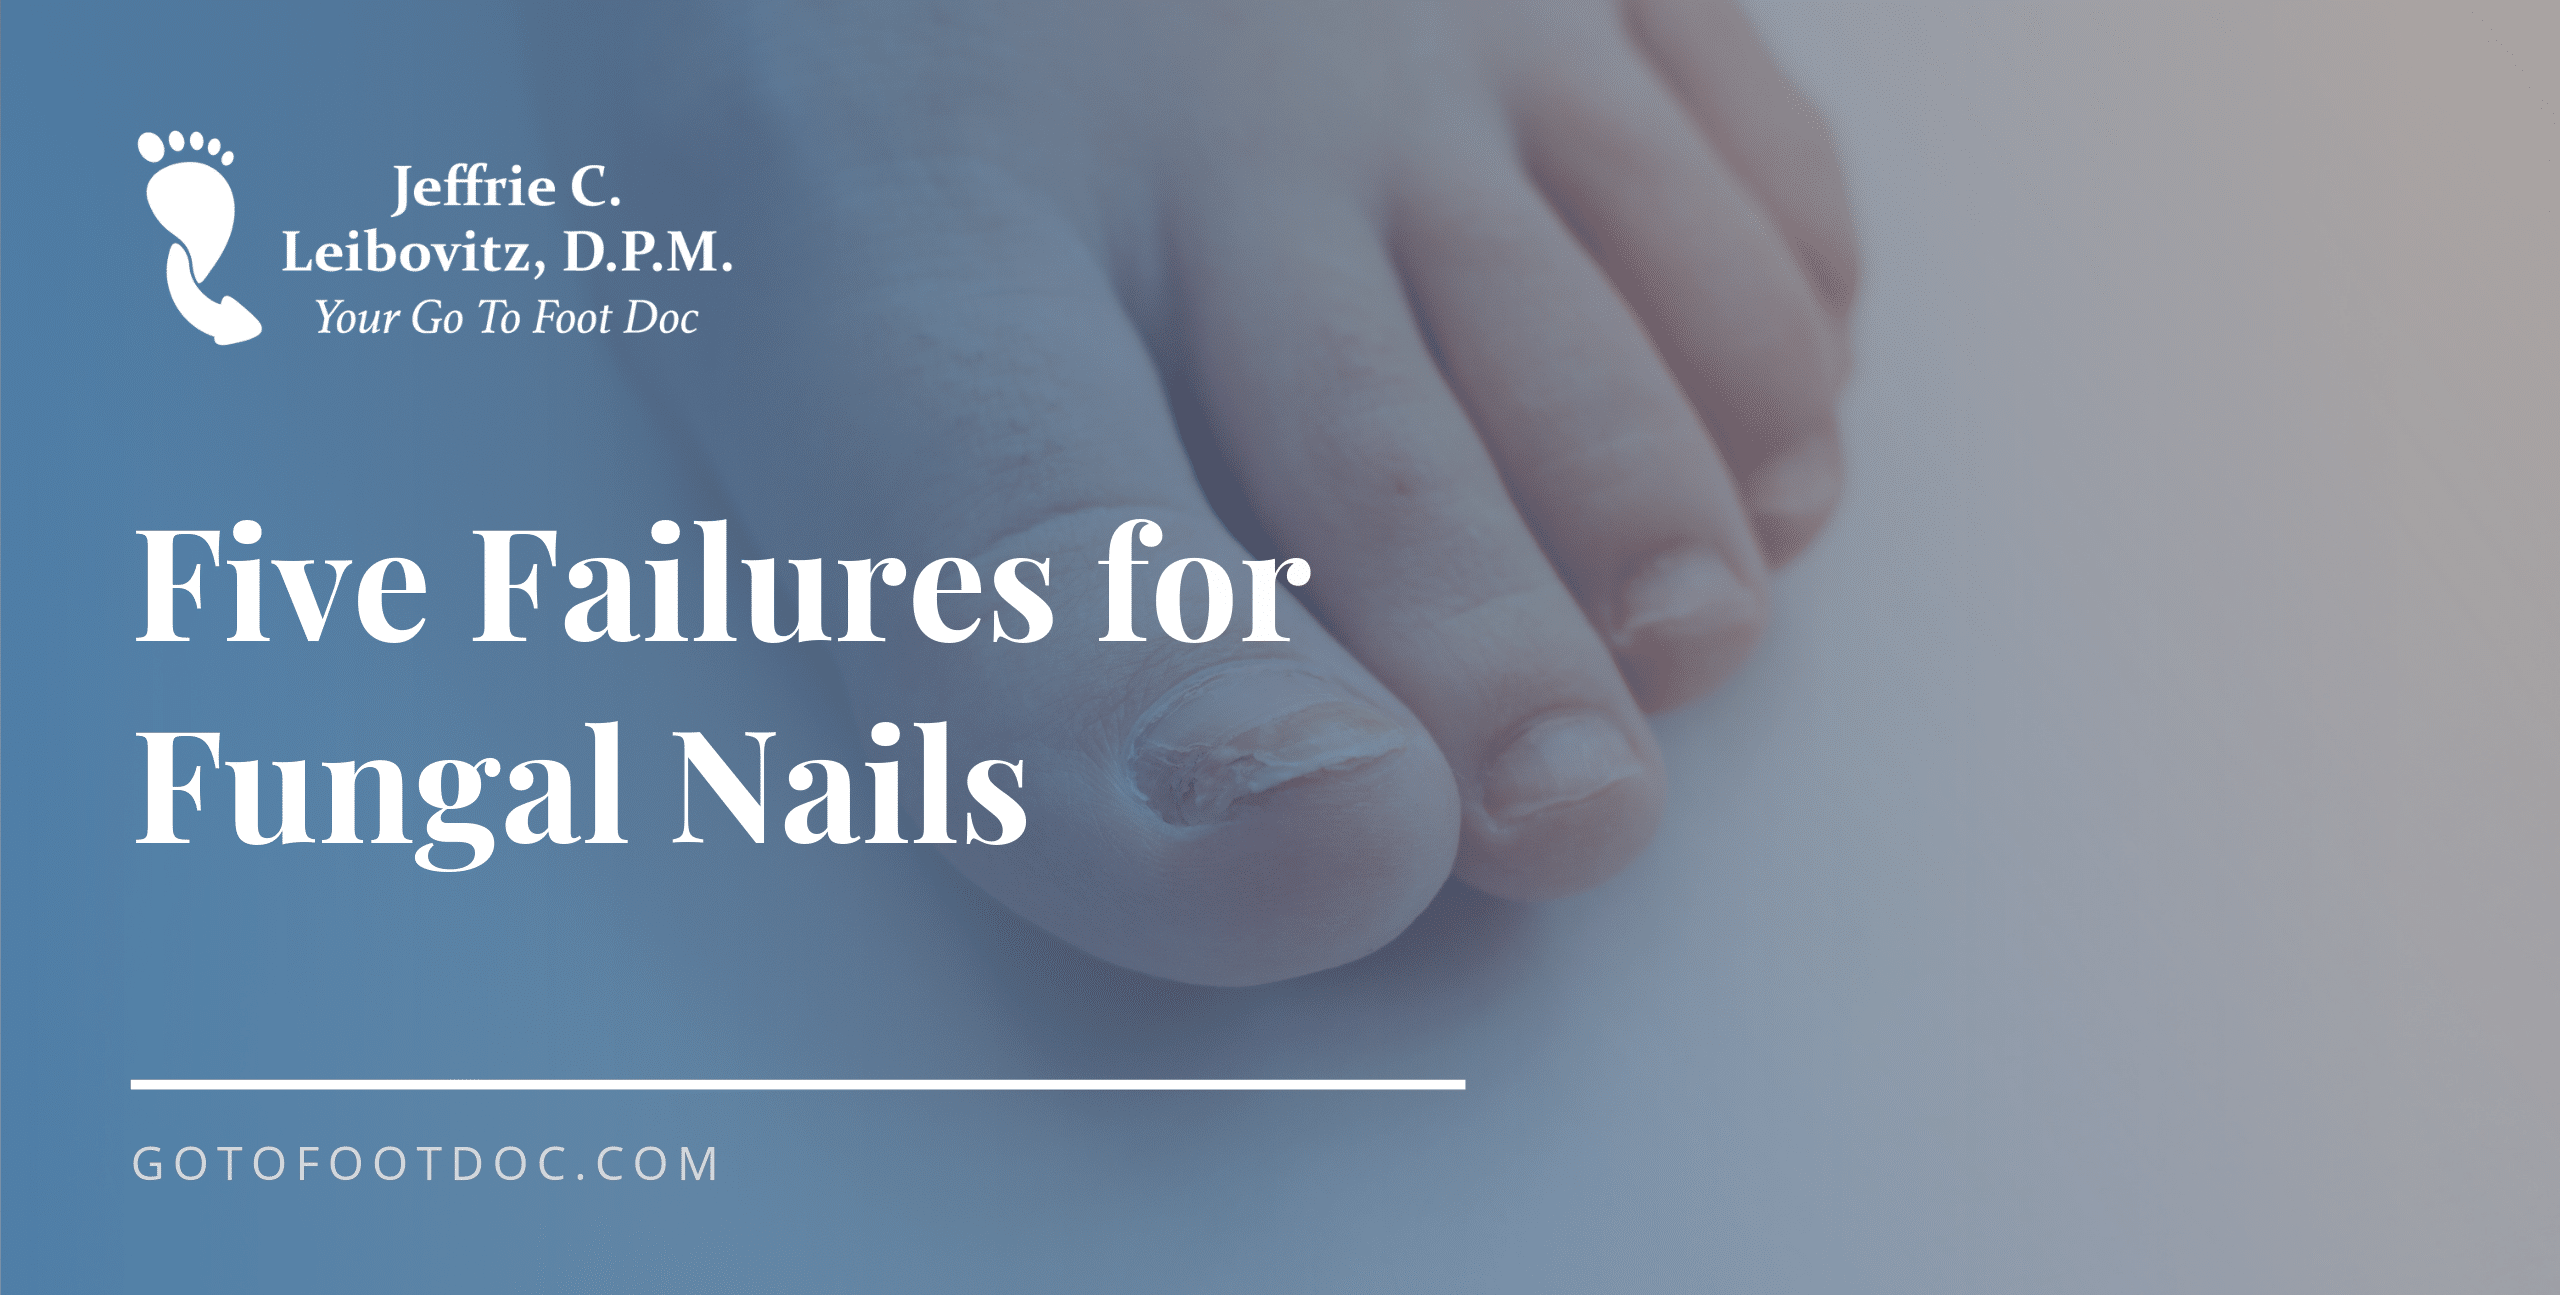 Five Failures for Fungal Nails